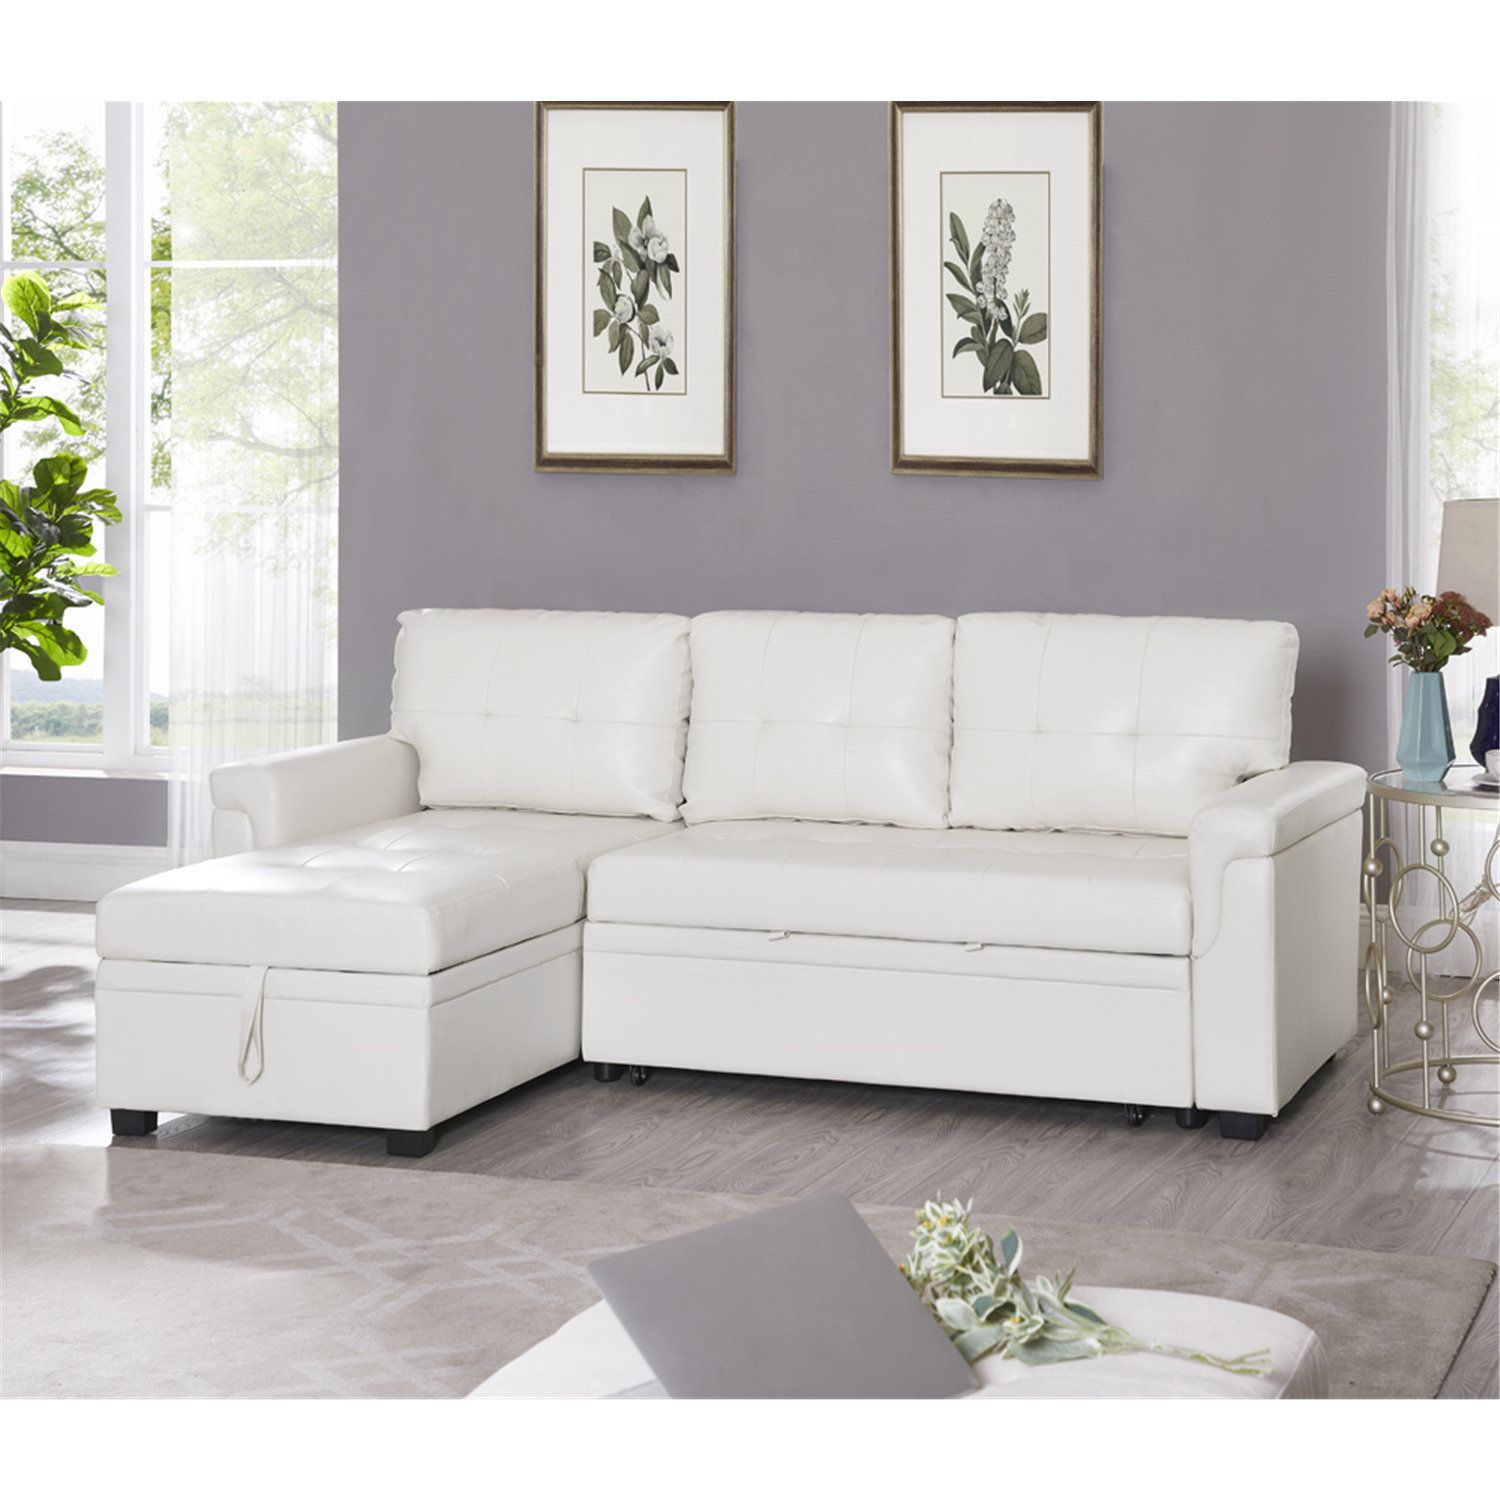 Ebern Designs Allport Sectional Sleeper Sofa With Pull Out Bed, Reversible  Sleeper Sectional Sofa Bed | Wayfair Inside Reversible Pull Out Sofa Couches (View 9 of 15)